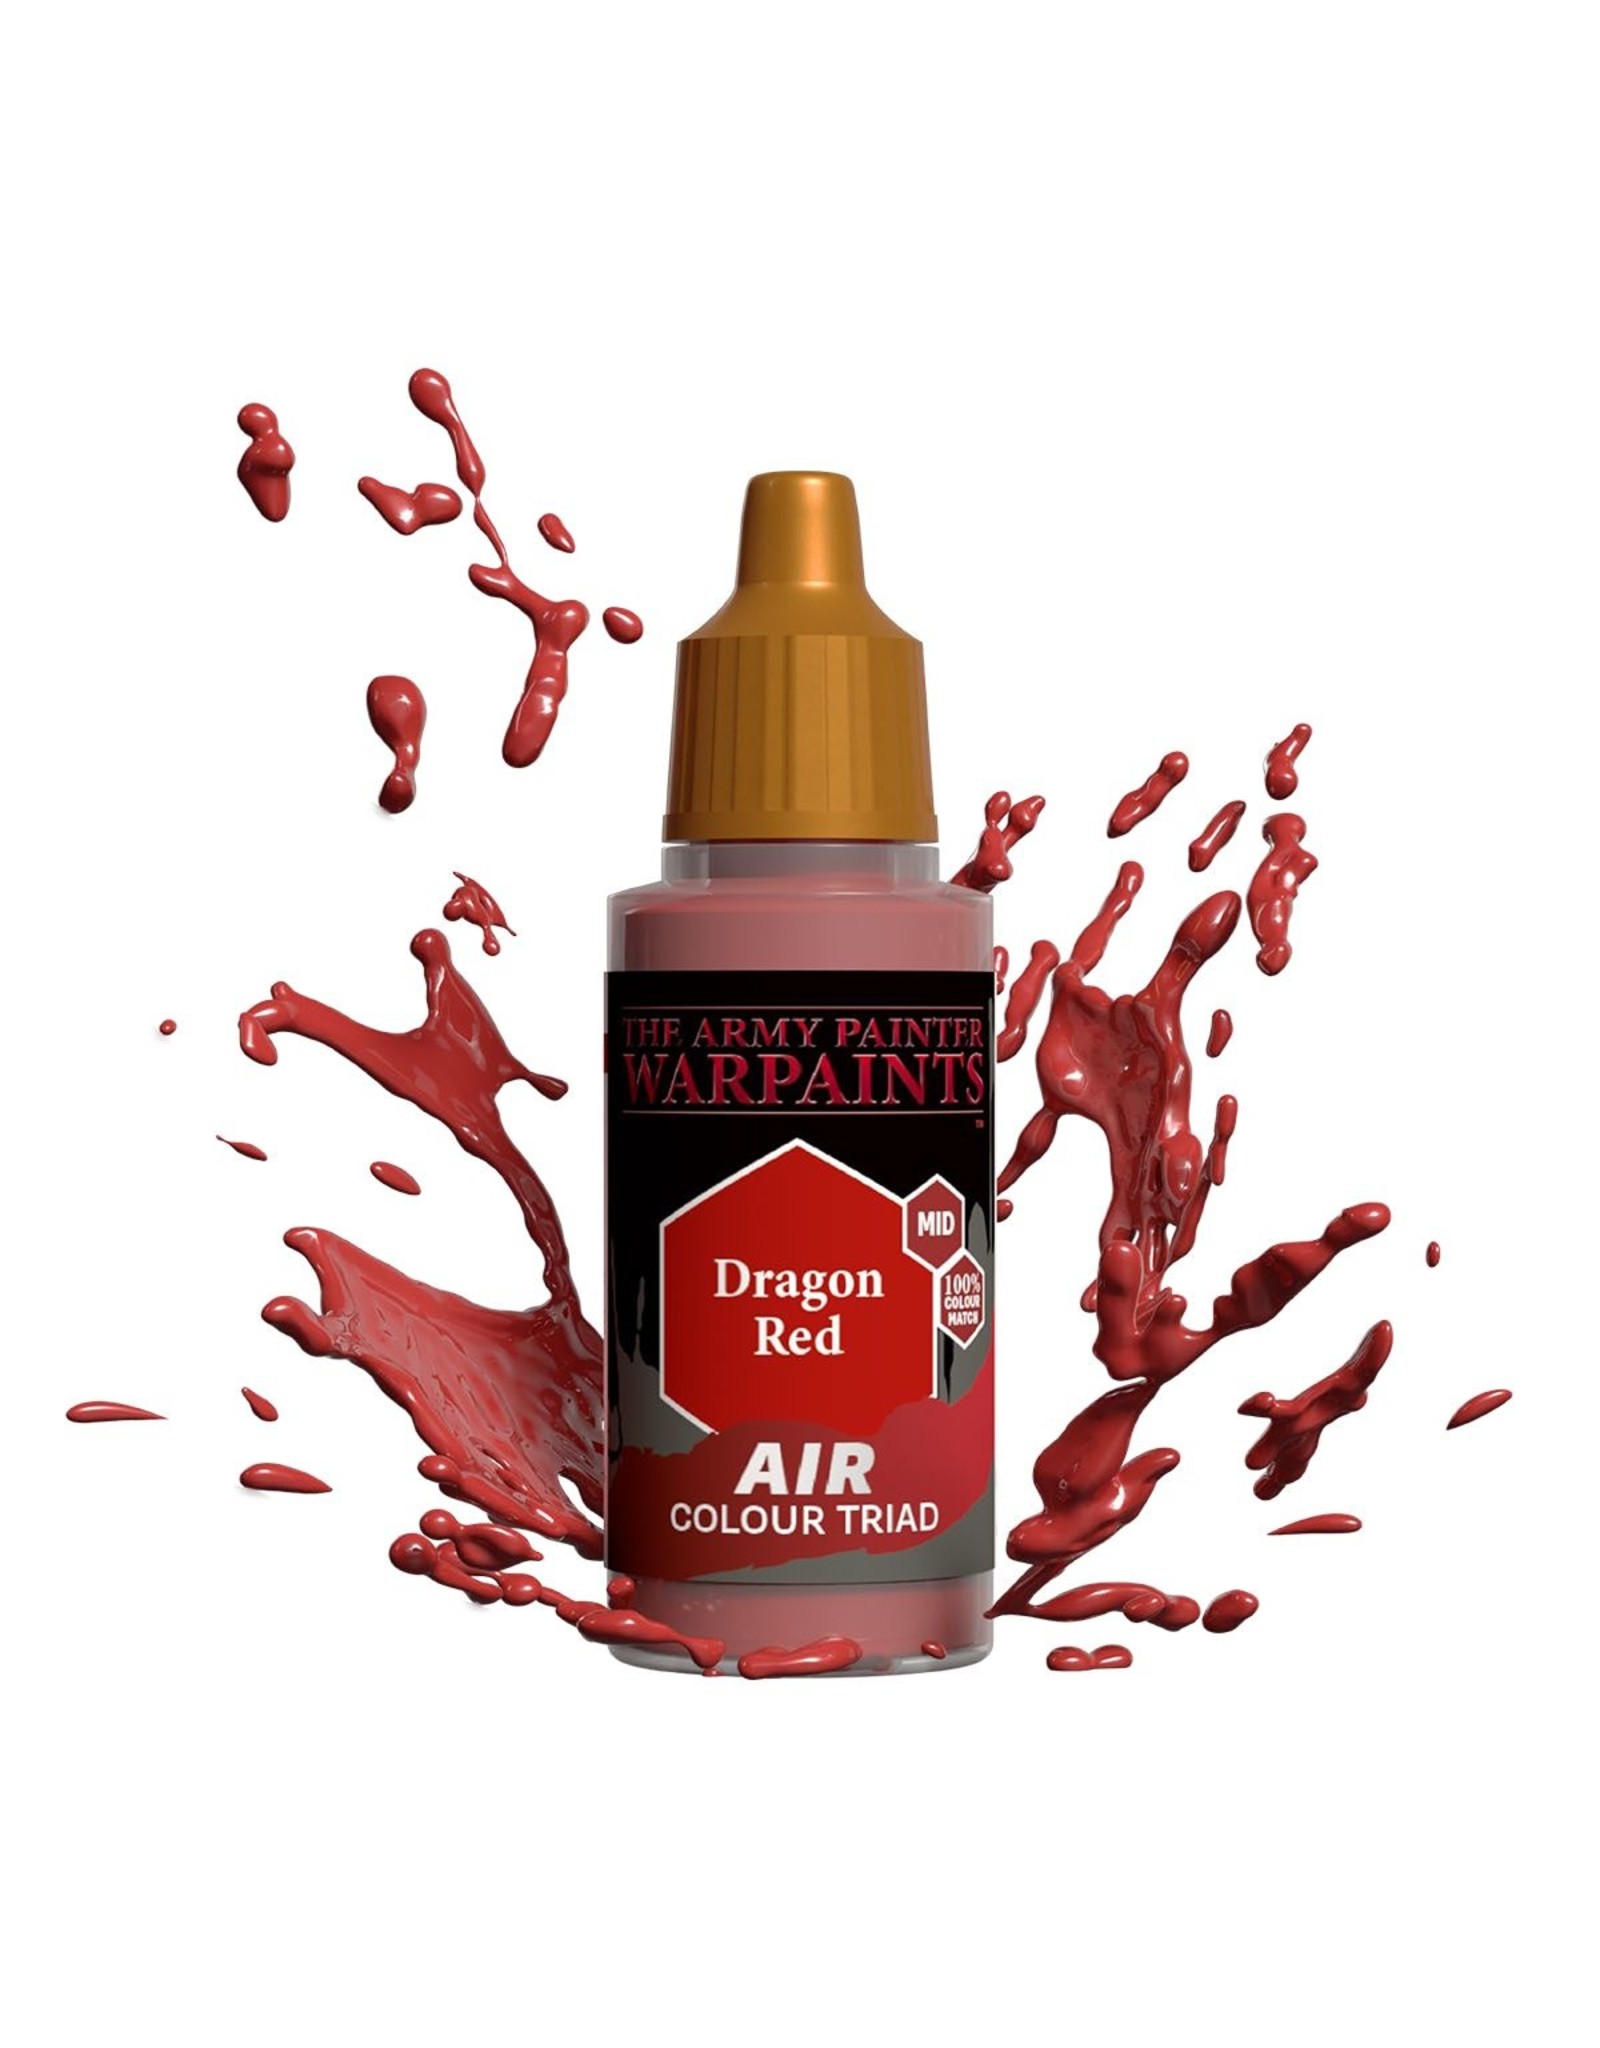 Army Painter Warpaint Air: Dragon Red, 18ml.